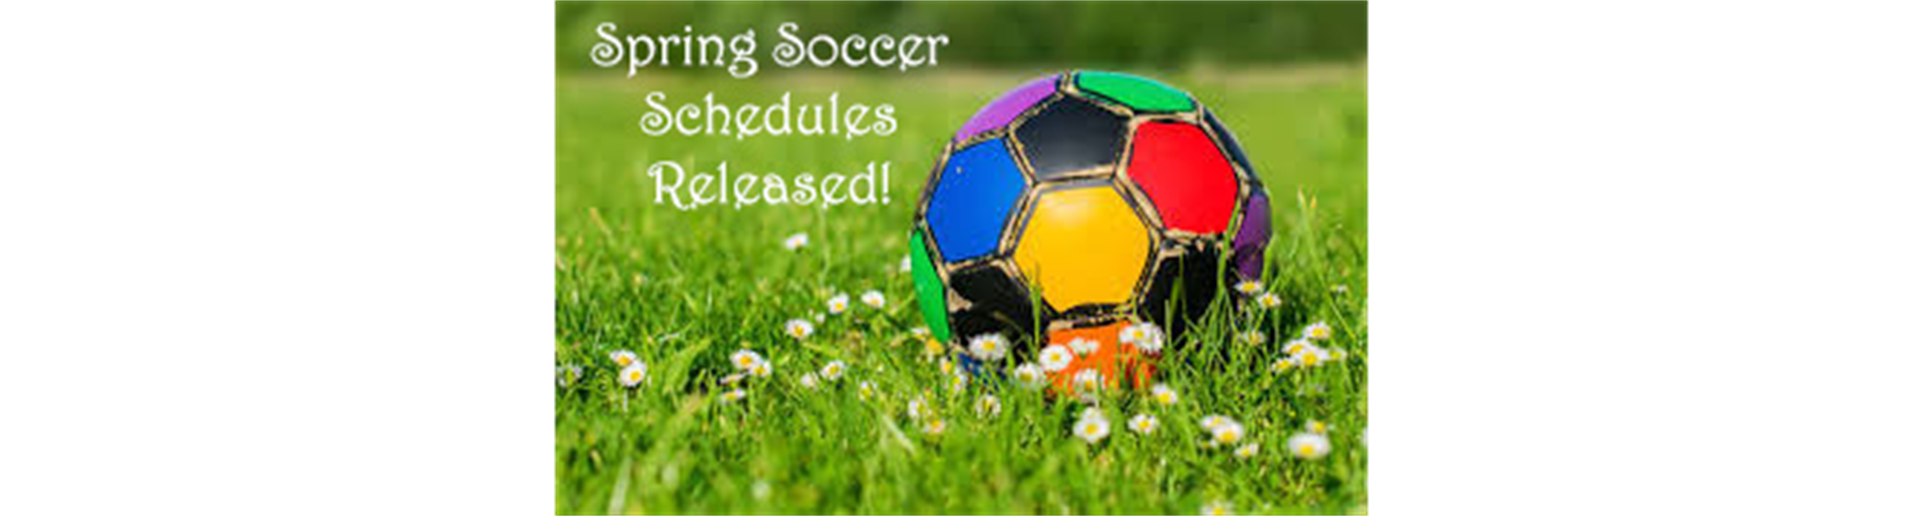 Soccer Schedules Released!